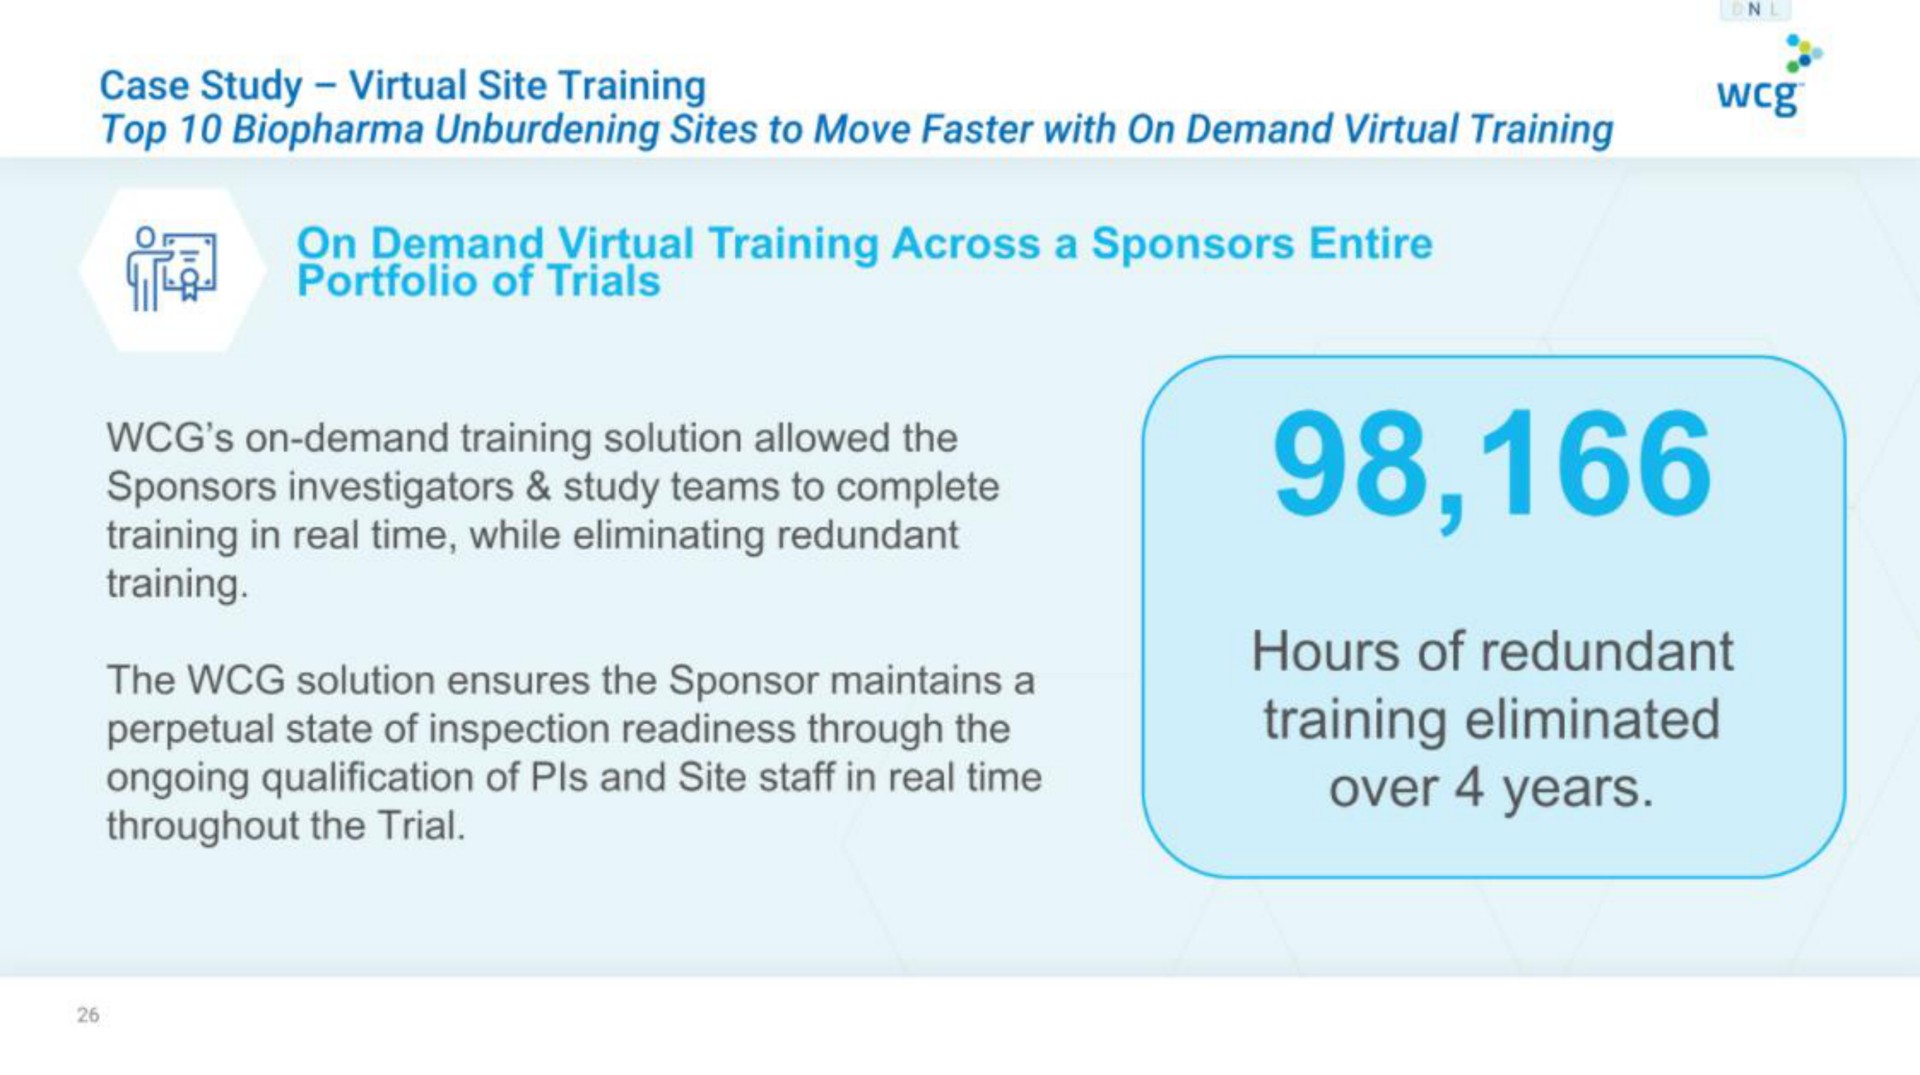 case study virtual site training top unburdening sites to move faster with on demand virtual training toe on demand virtual training across a sponsors entire portfolio of trials on demand training solution allowed the training in real time while eliminating redundant the solution ensures the sponsor maintains a perpetual state of inspection readiness through the hours of redundant training eliminated | WCG